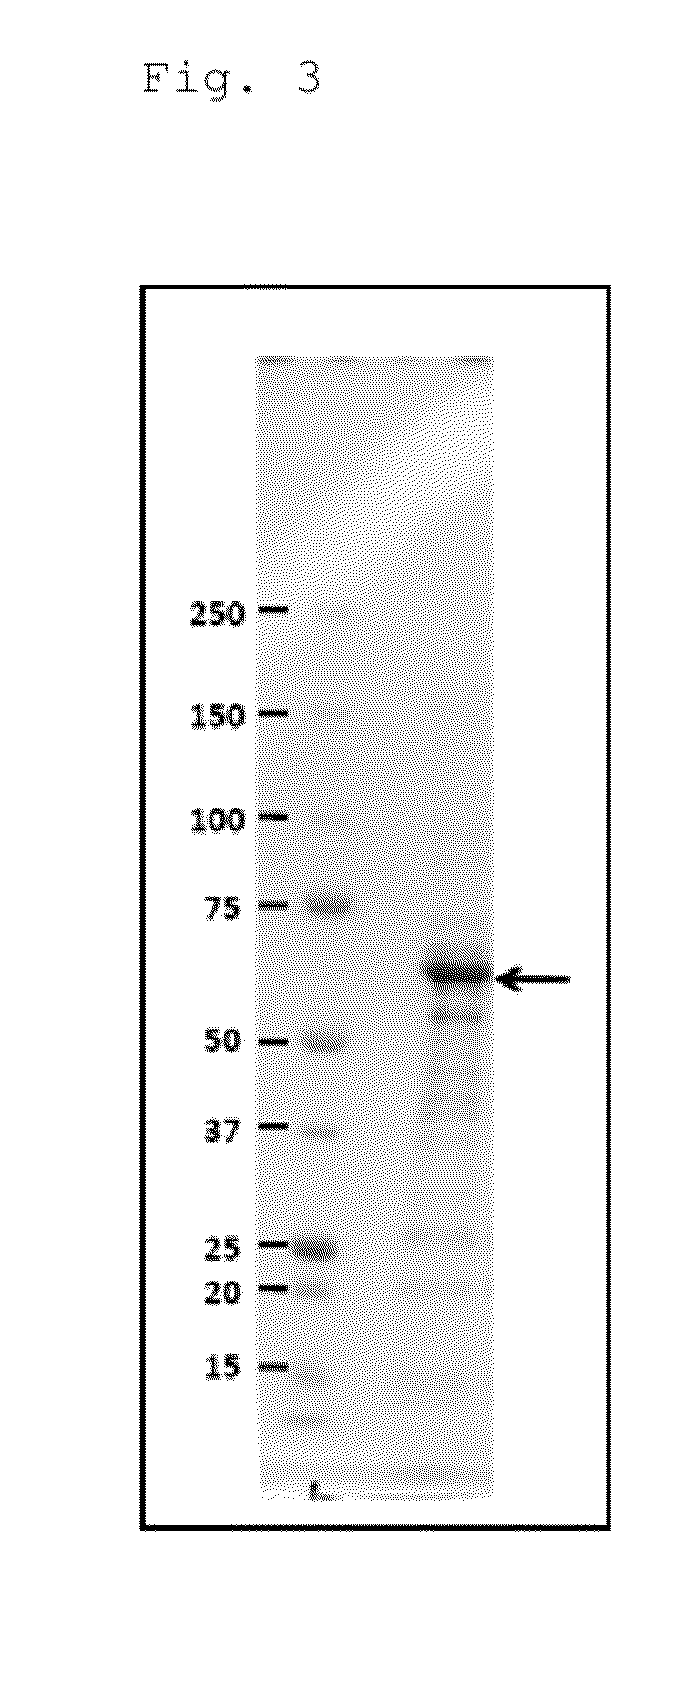 Methods and composition for testing, preventing, and treating aspergillus fumigatus infection